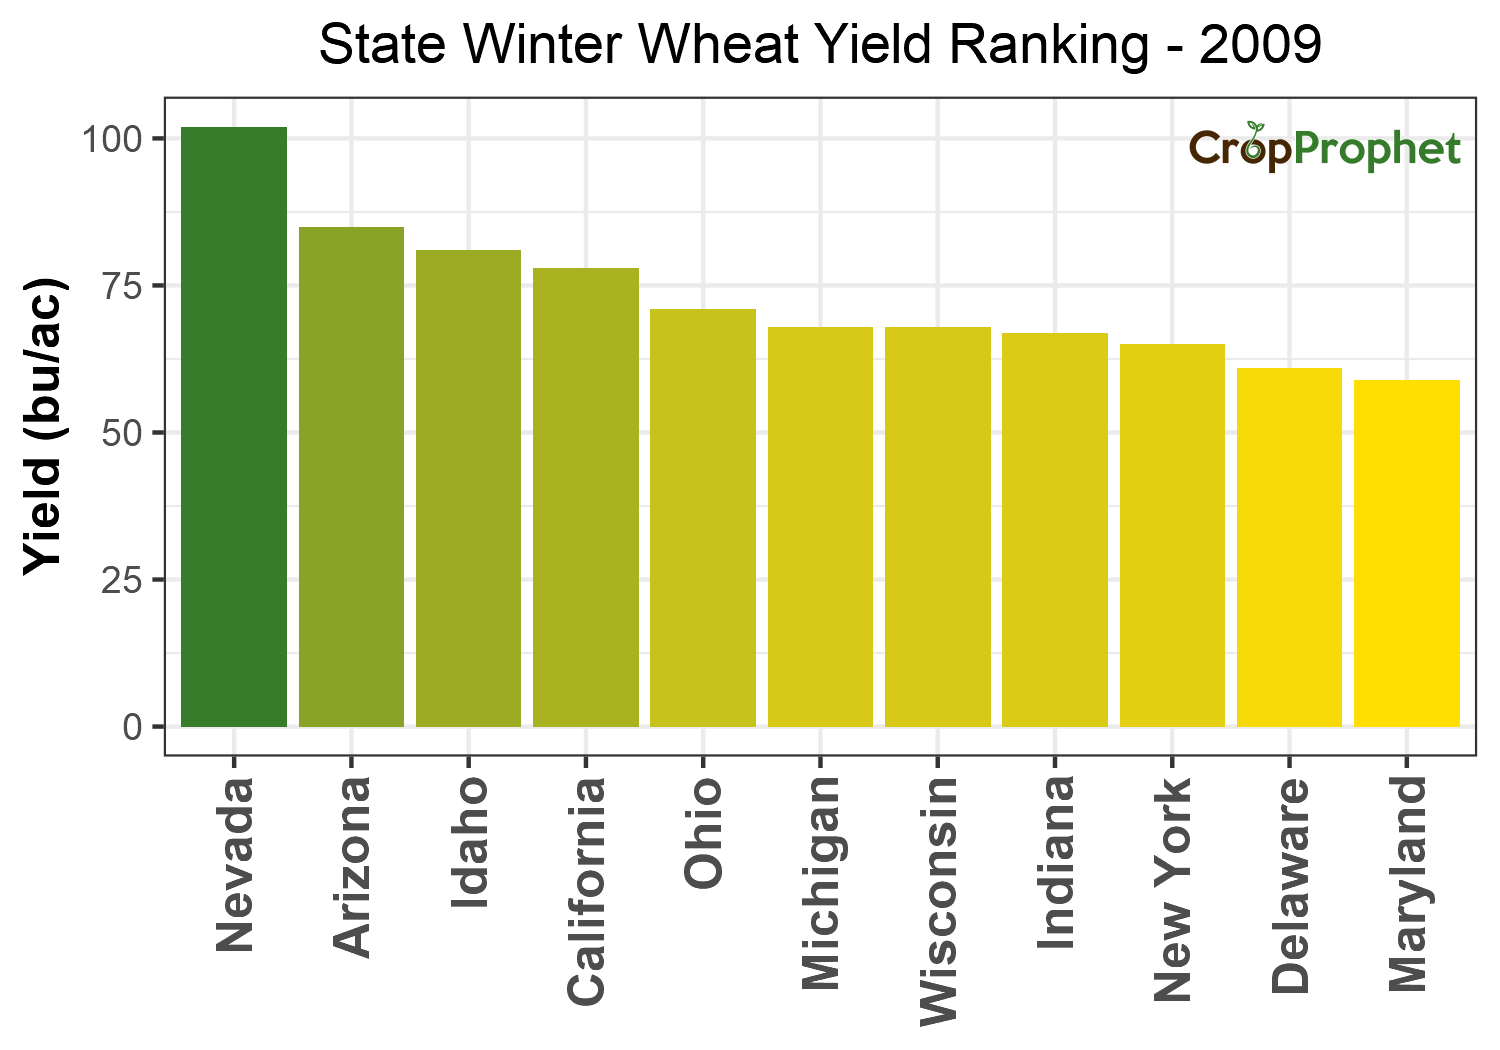 Winter wheat Production by State - 2009 Rankings